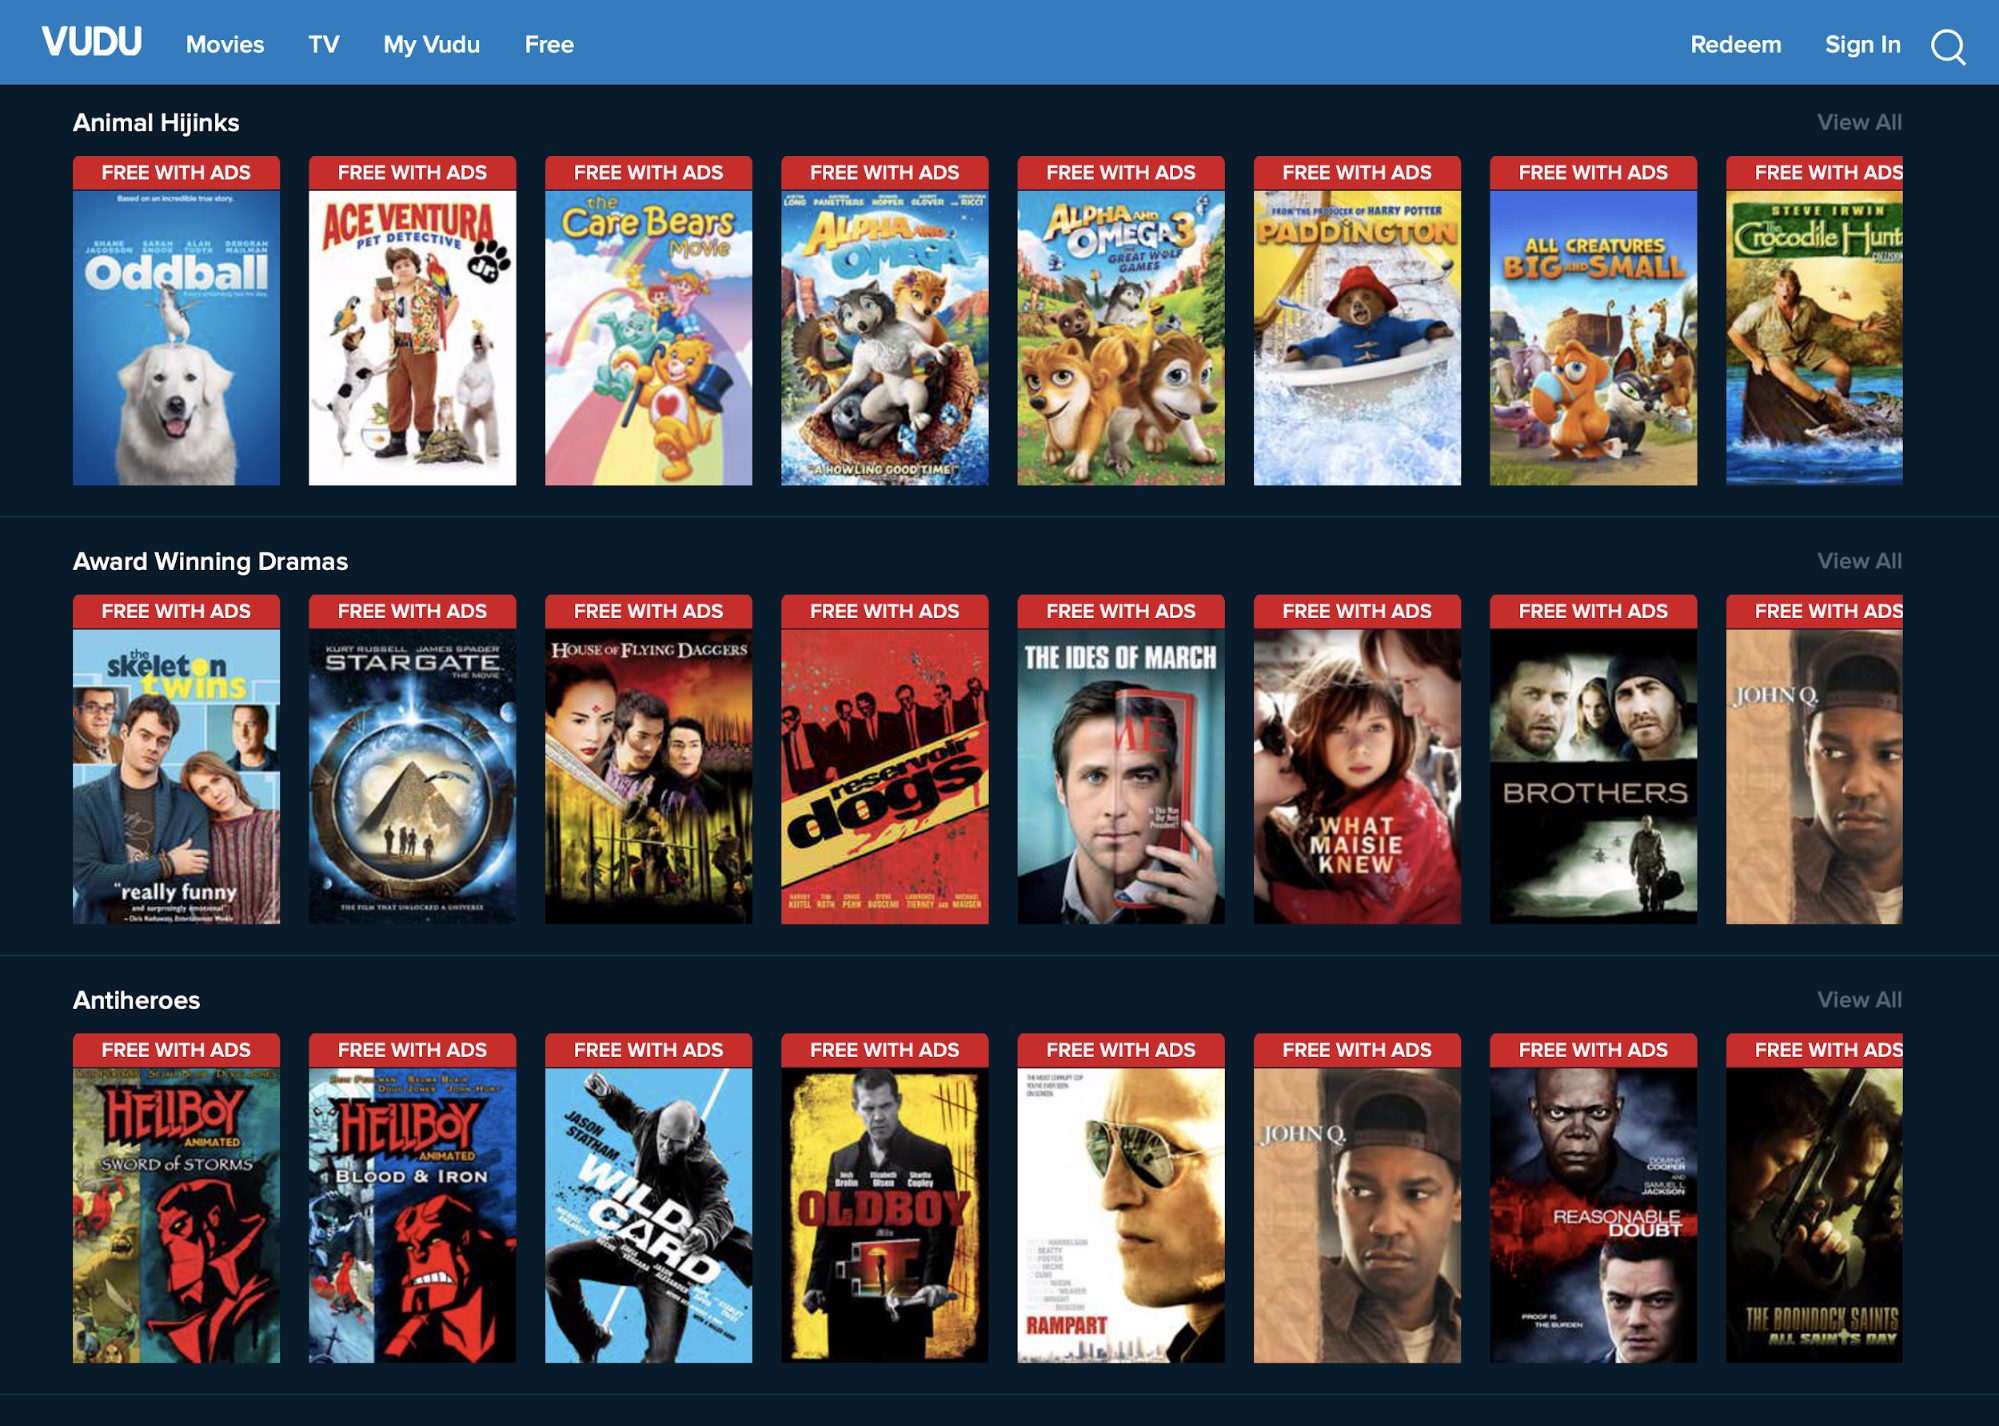 How To Find the Best Deal on Digital Movie Rentals - TidBITS